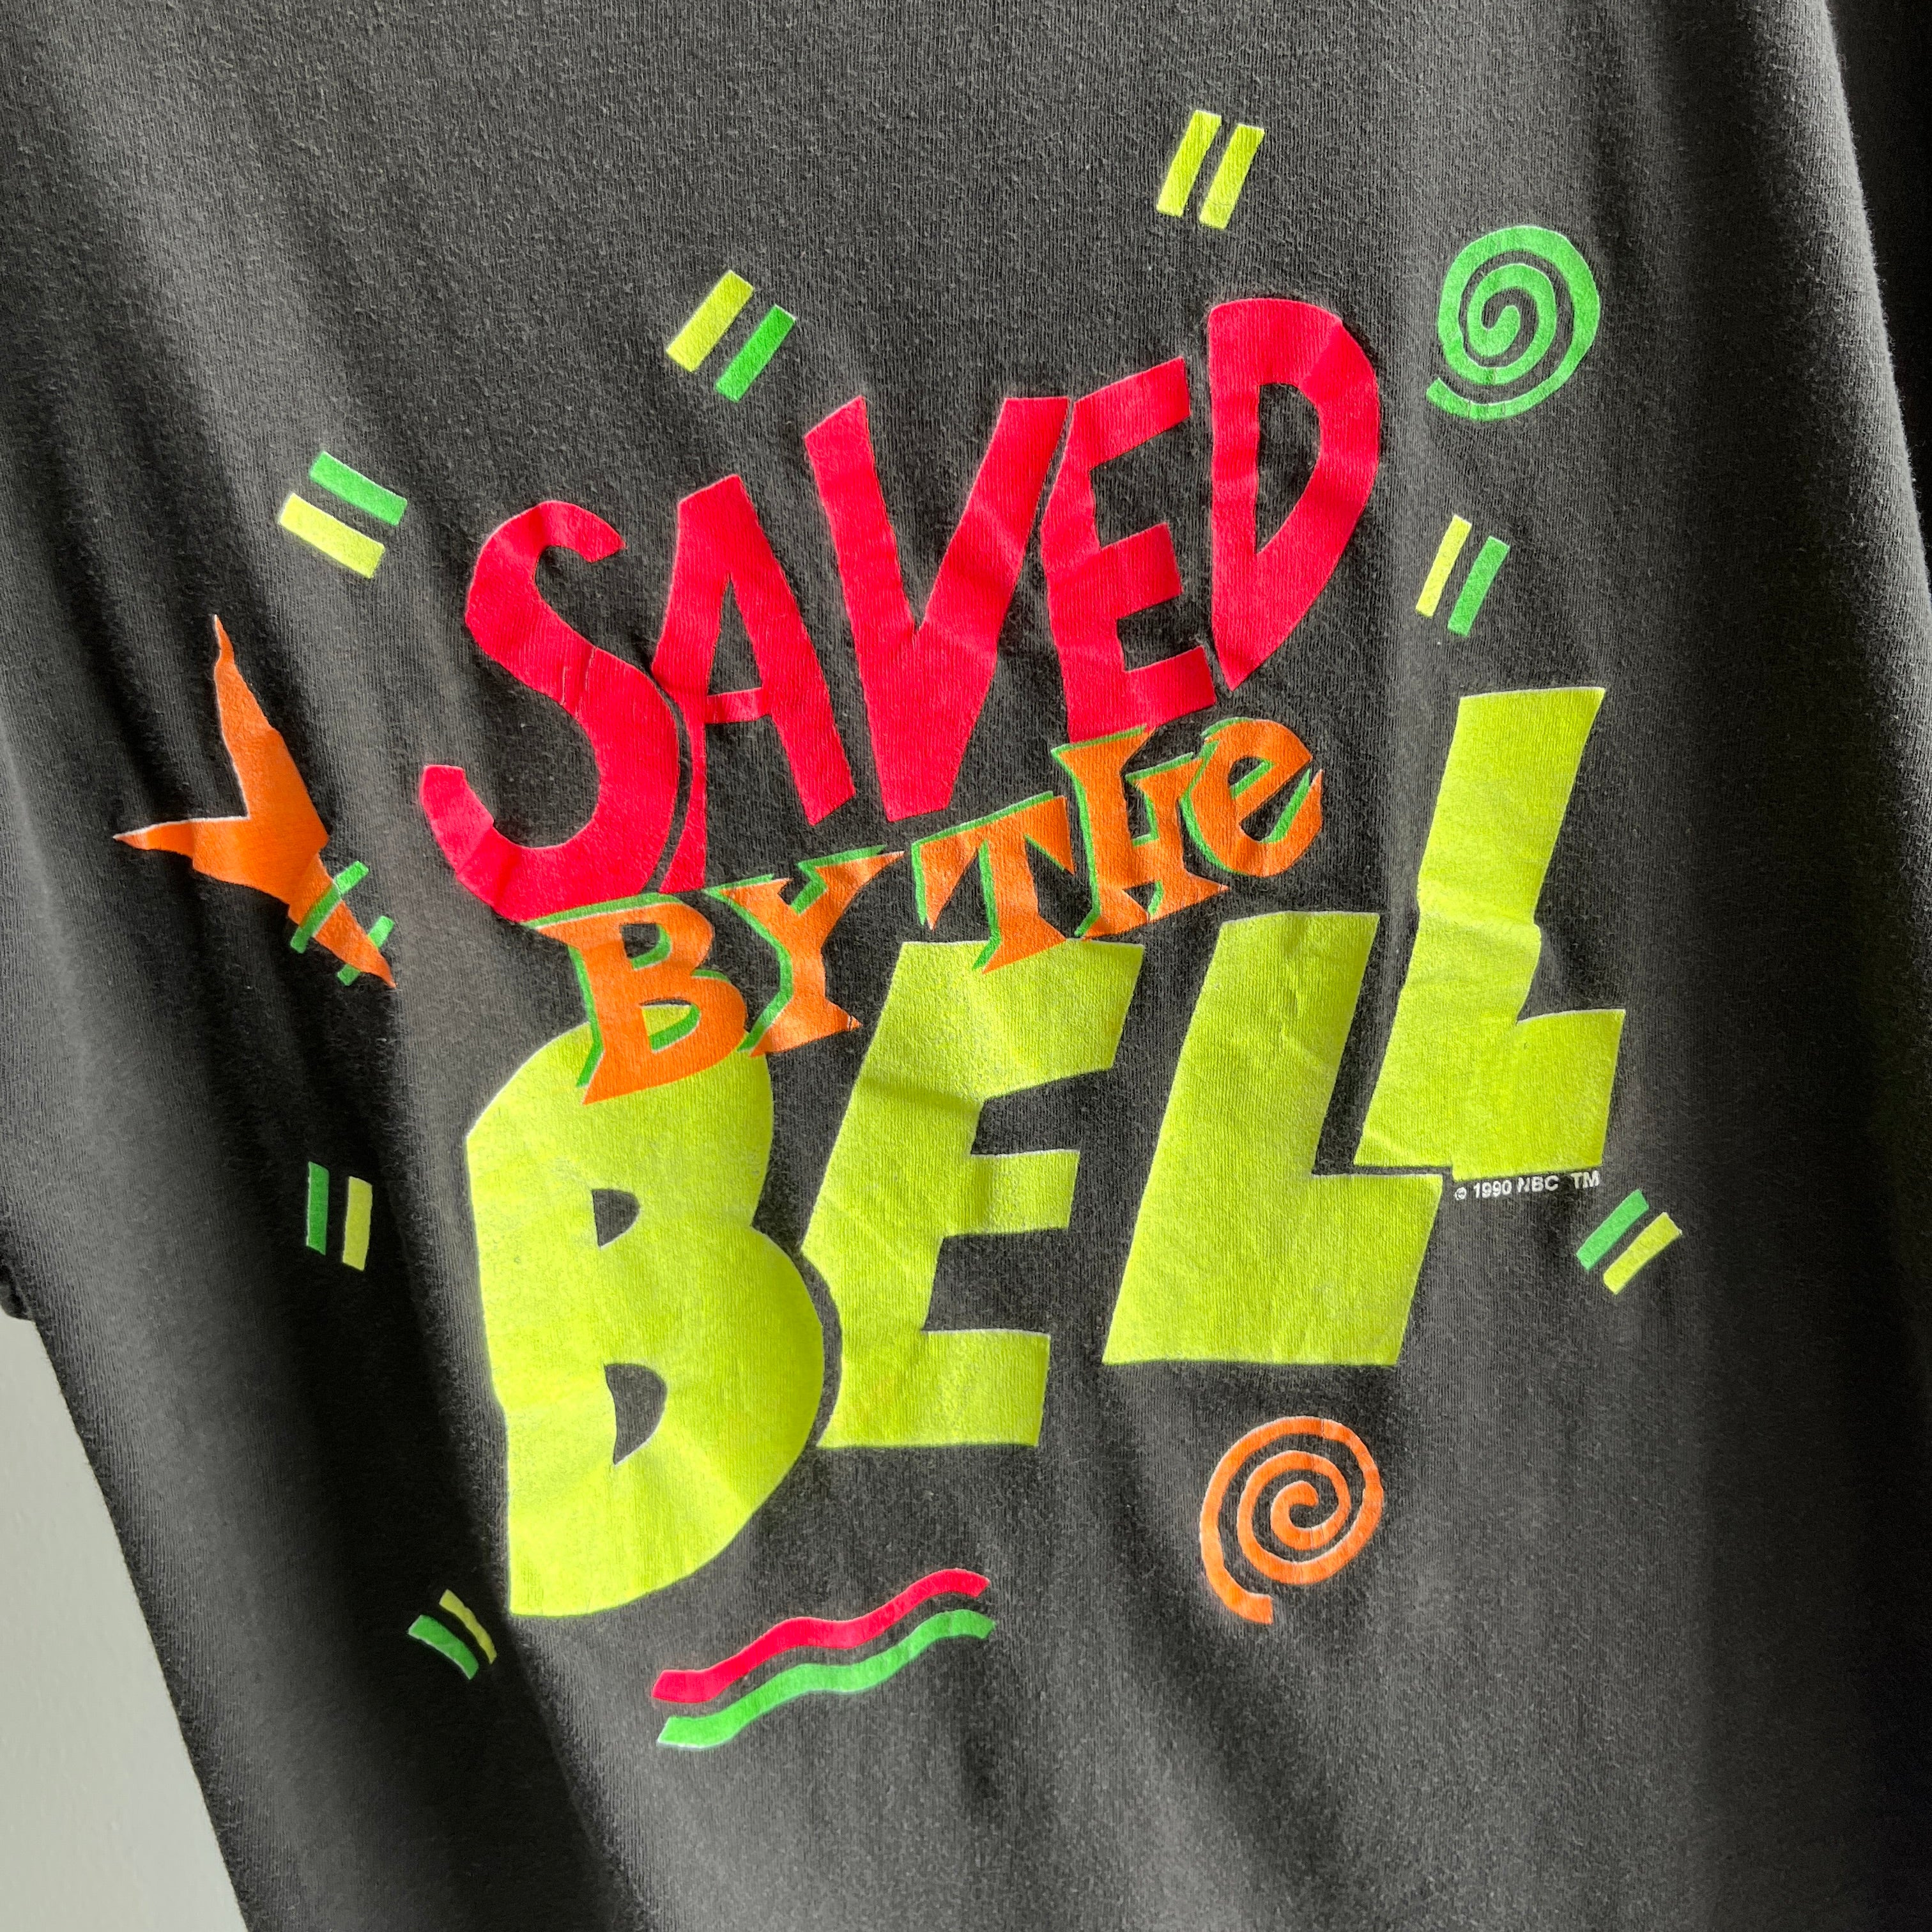 1990 Saved By The Bell Cotton T-Shirt !!!